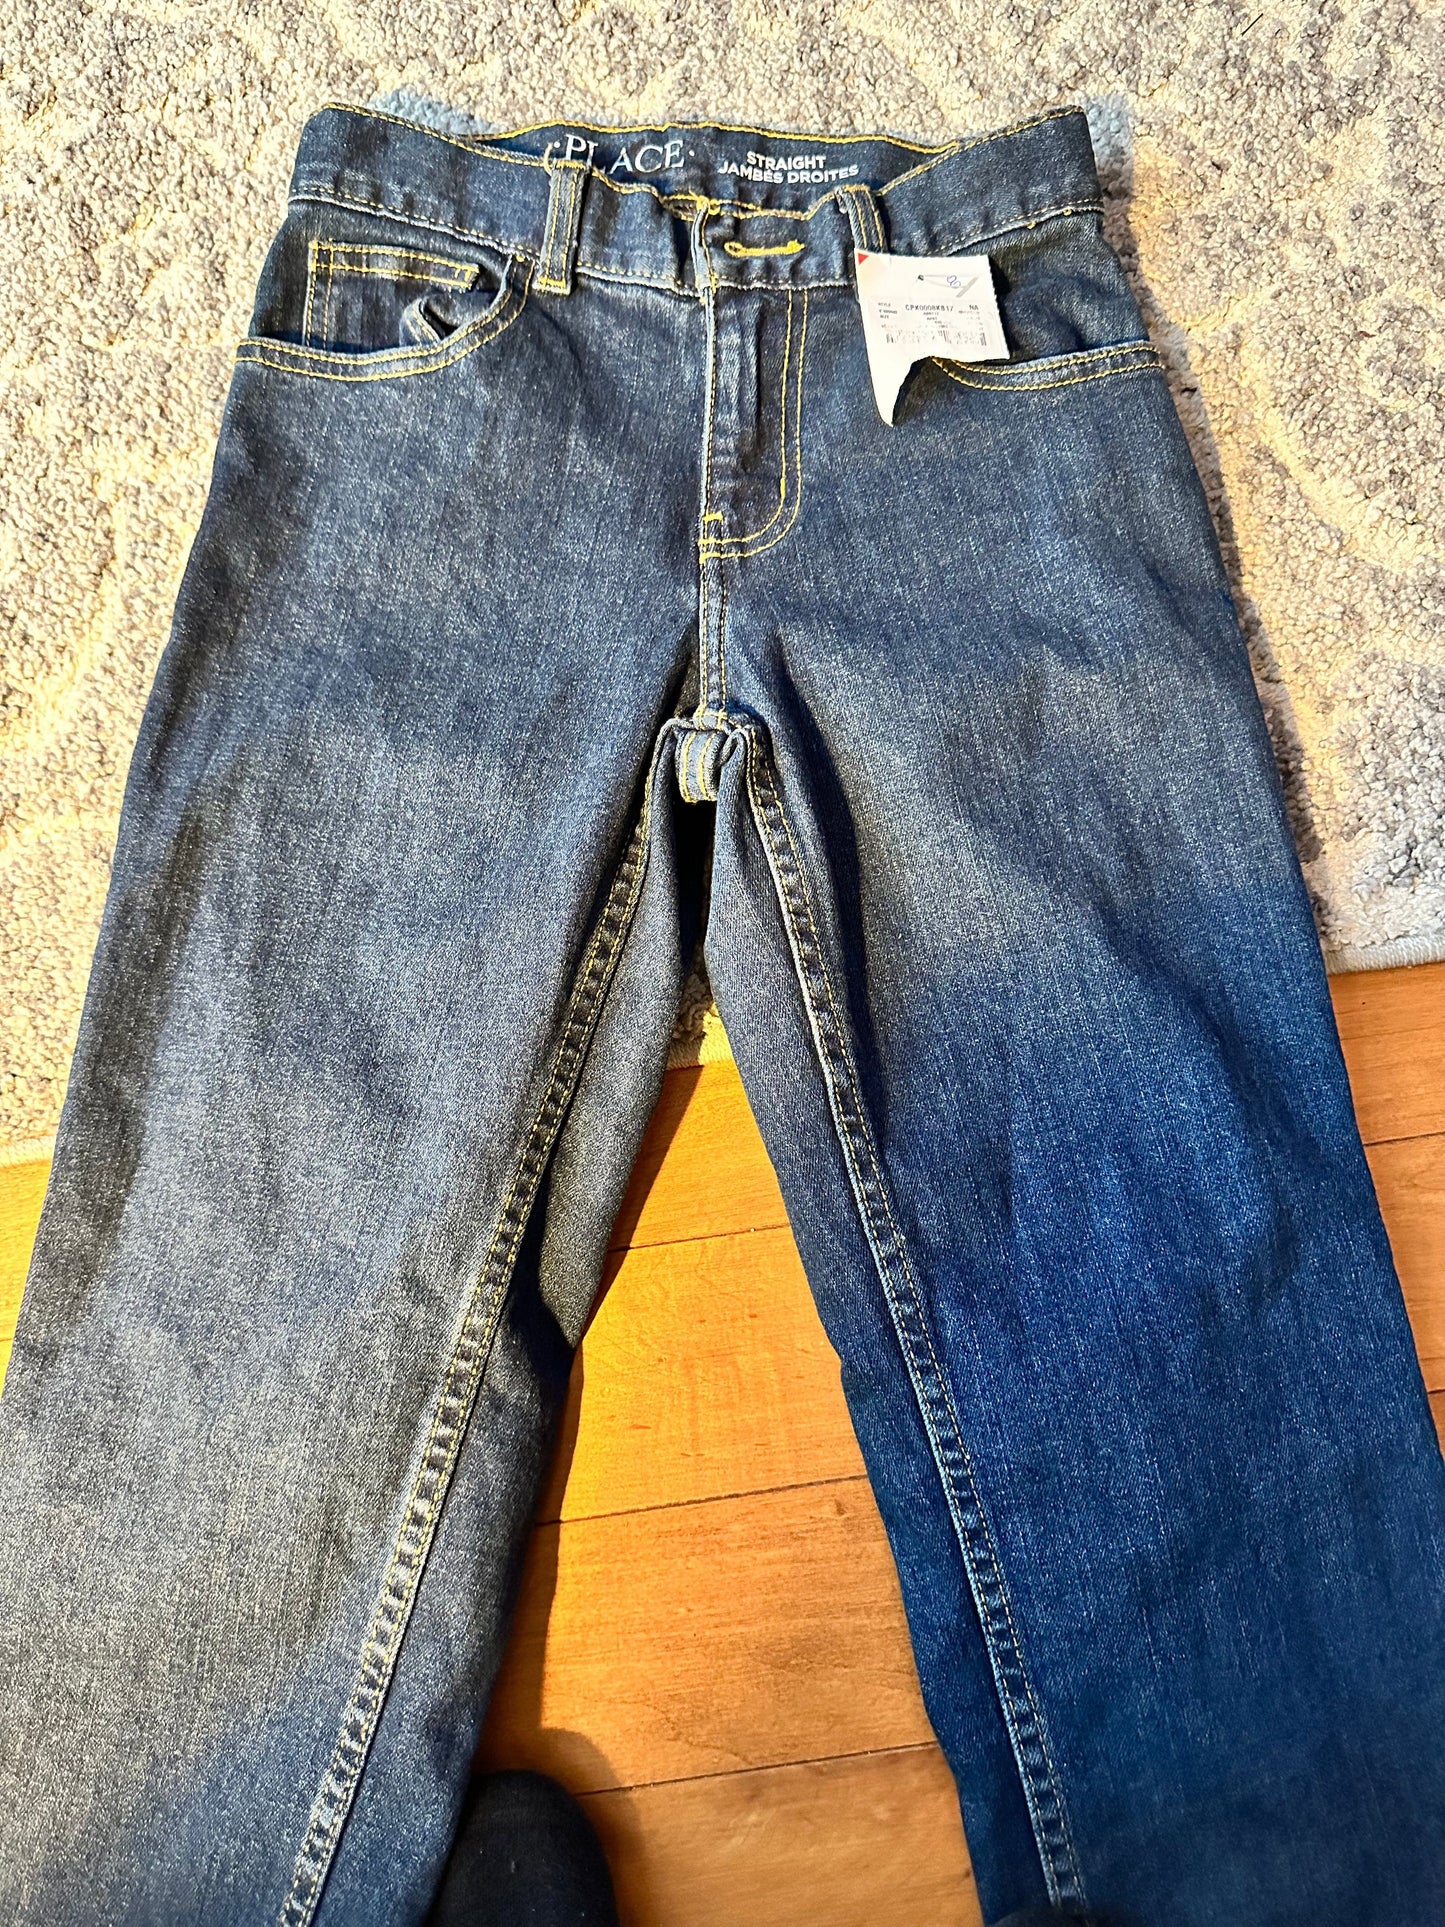 New - adjustable jeans size 8